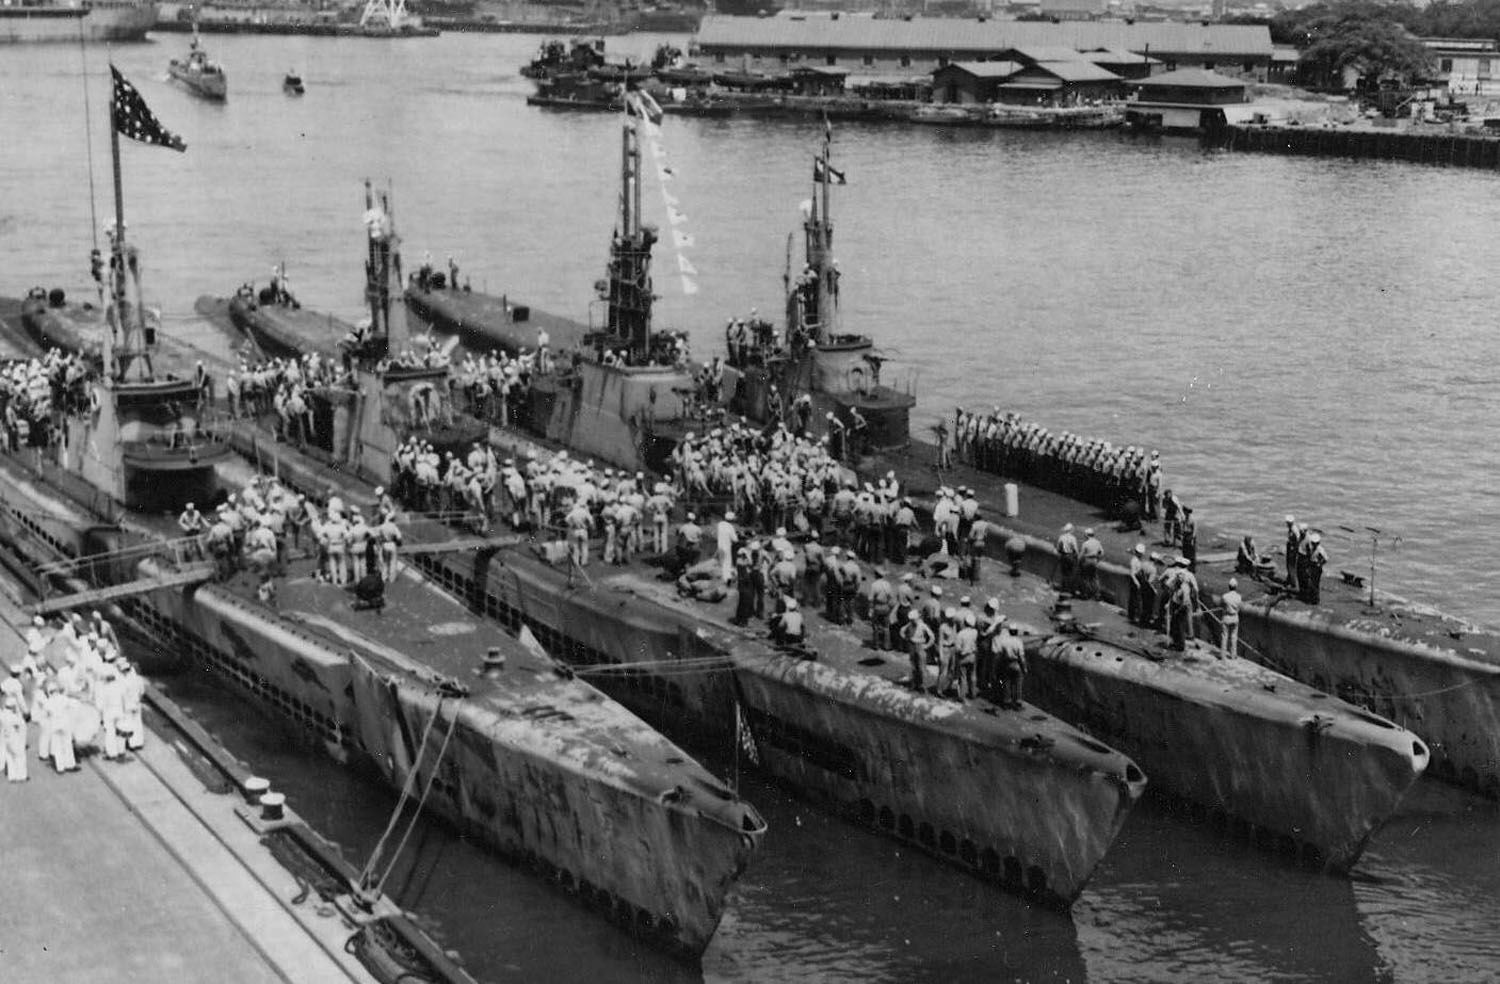 Five of Hydeman's Hellcats upon their return from Operation Barney: USS Flying Fish, USS Spadefish, USS Tinosa, and USS Bowfin in port with USS Skate approaching, Pearl Harbor, US Territory of Hawaii, 4 Jul 1945